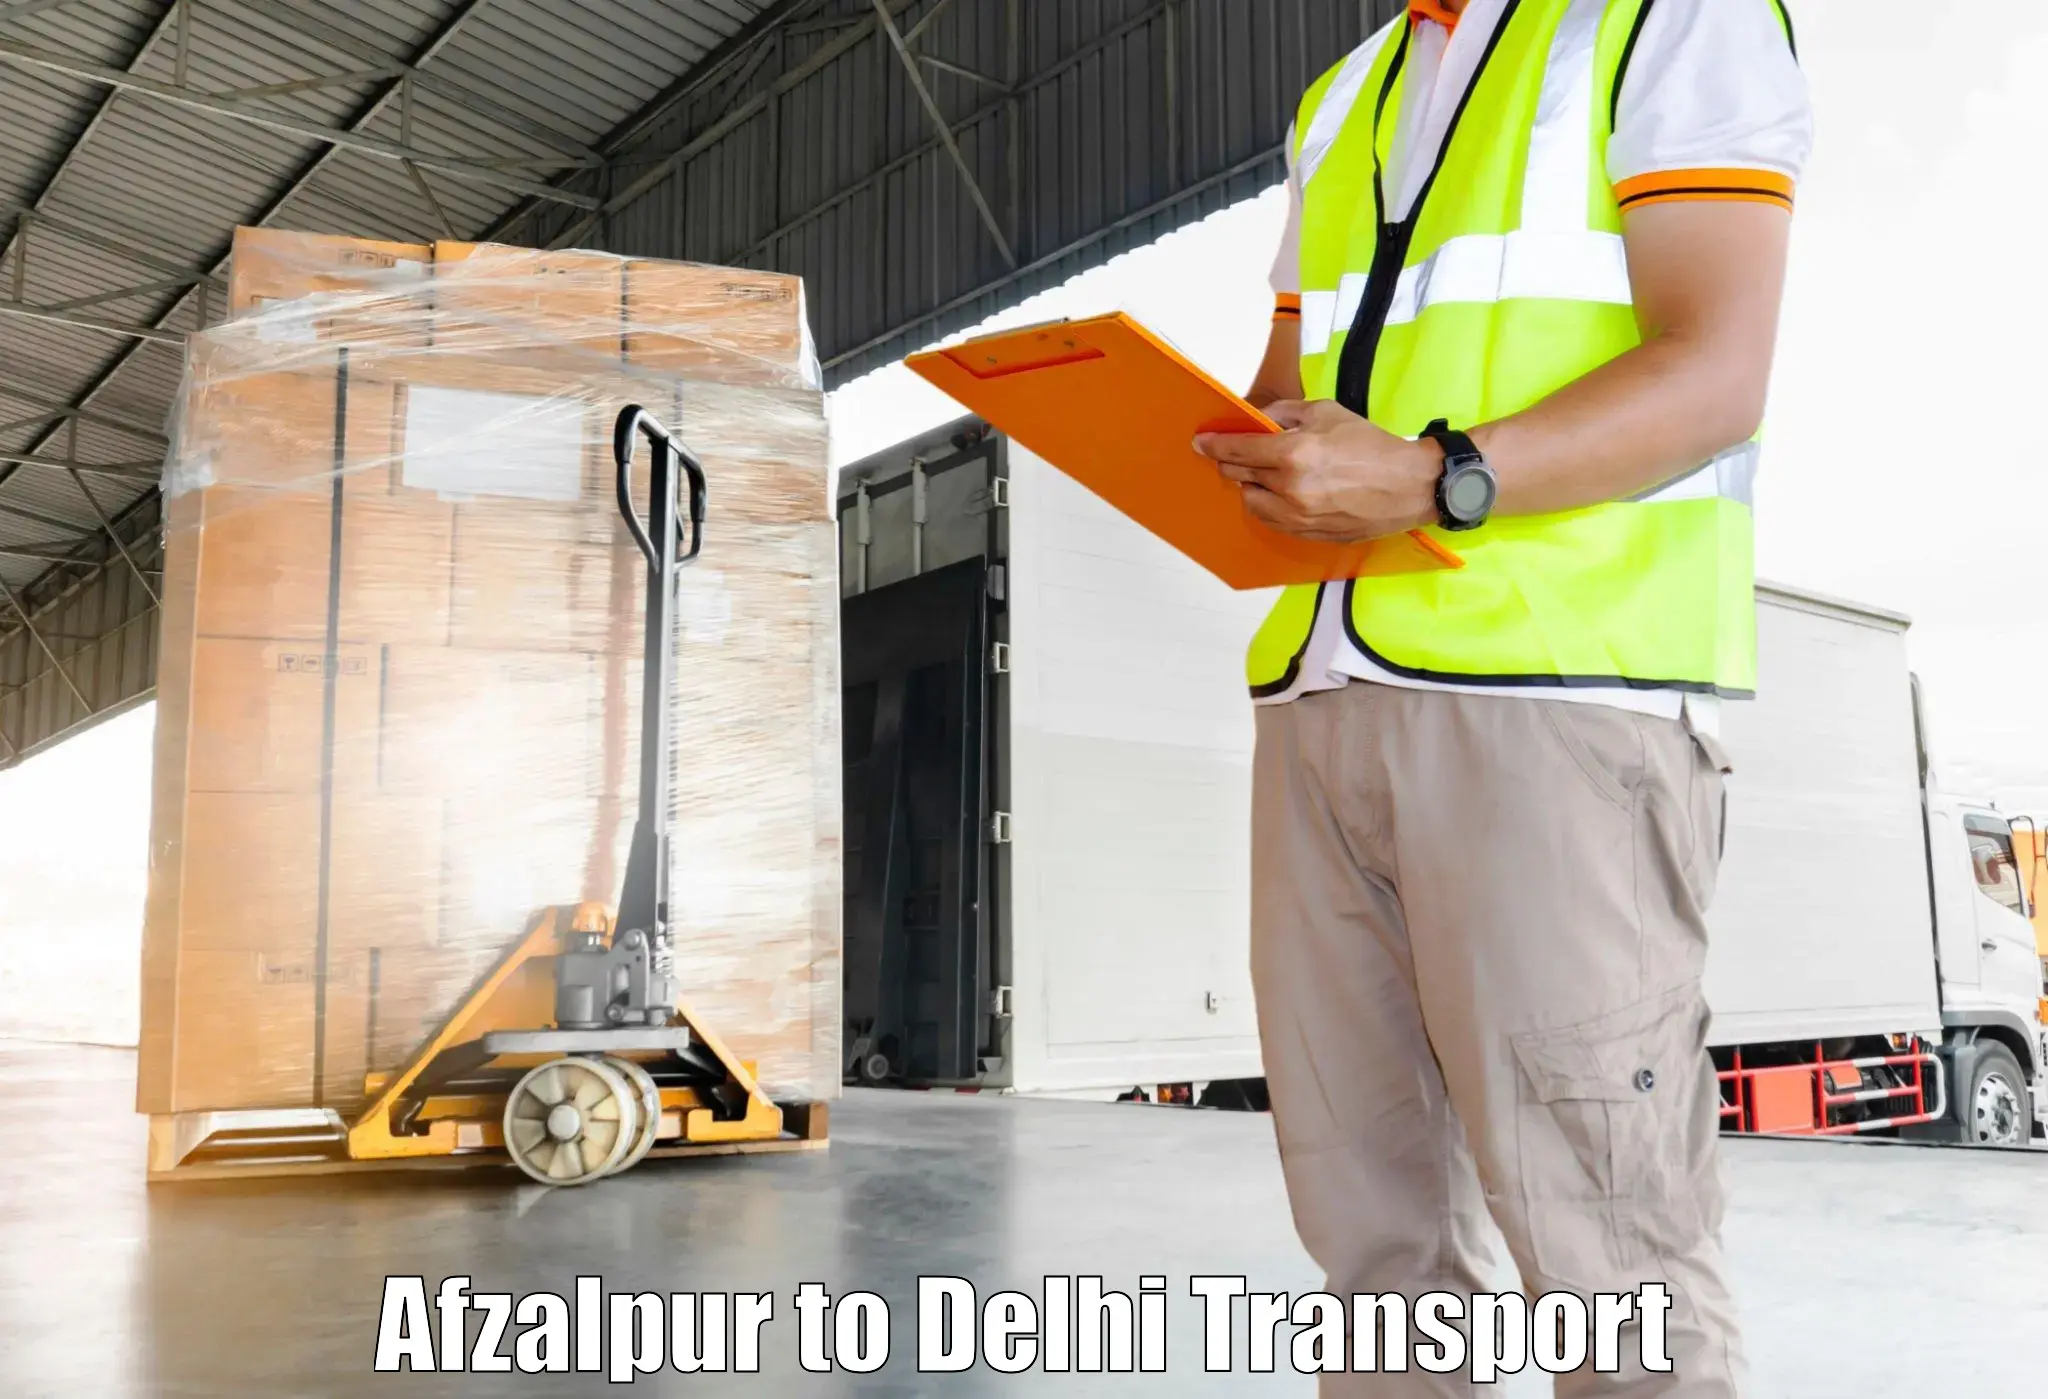 Transport bike from one state to another Afzalpur to Delhi Technological University DTU